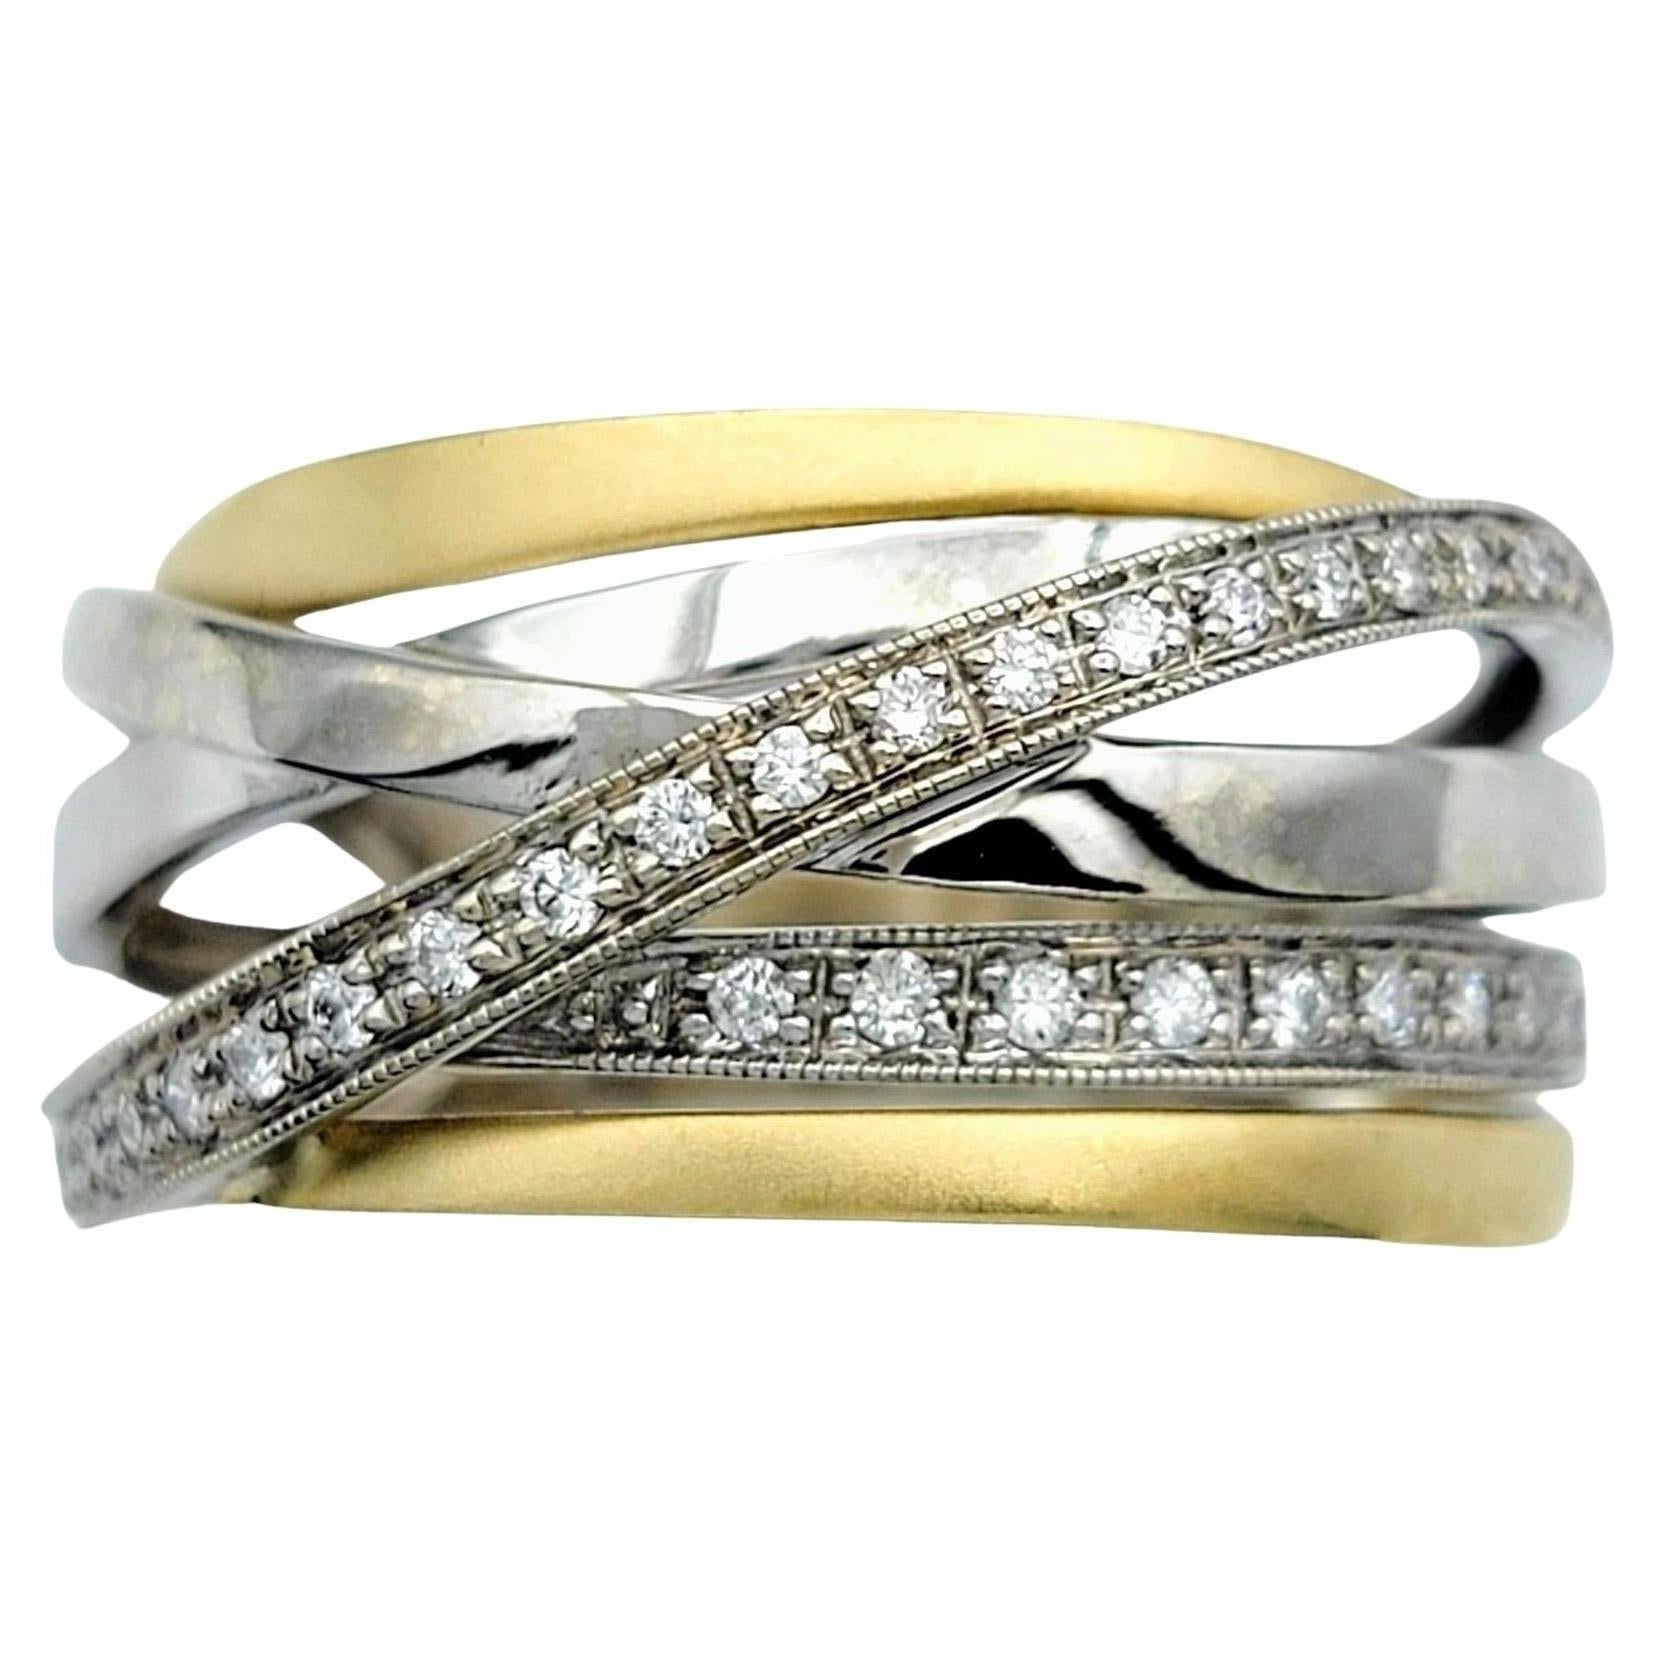 Ring Size: 8 

This exquisite diamond band ring boasts a sophisticated crisscross design, crafted from lustrous 18 karat white and yellow gold. The intertwining bands create an elegant and dynamic pattern that showcases the brilliance of the